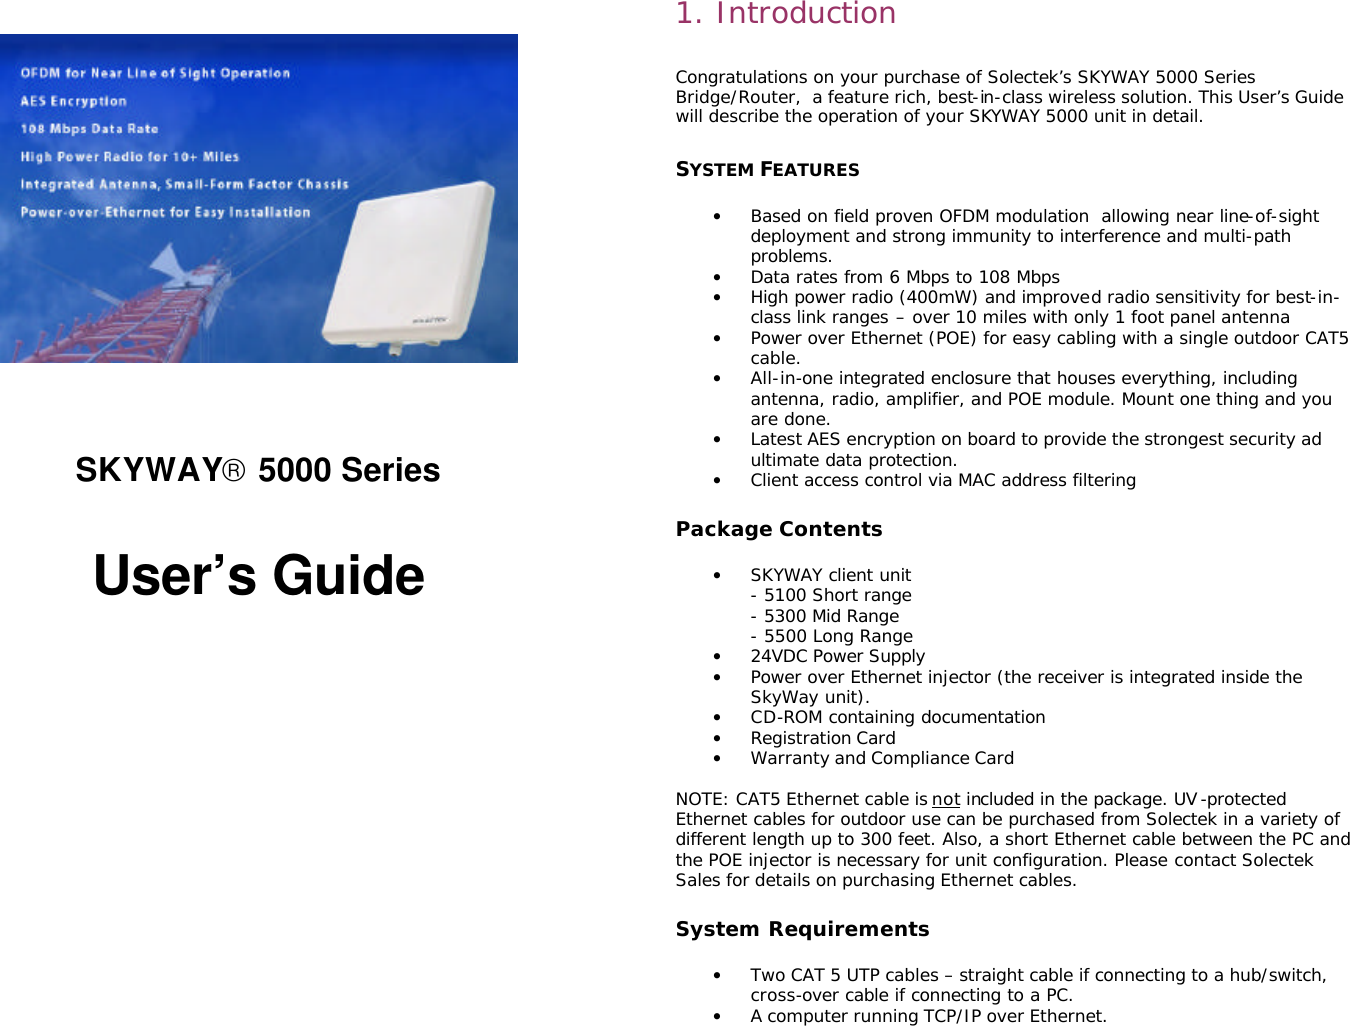                                                                                                                                                           SKYWAY 5000 Series   User’s Guide               1. Introduction  Congratulations on your purchase of Solectek’s SKYWAY 5000 Series Bridge/Router,  a feature rich, best-in-class wireless solution. This User’s Guide will describe the operation of your SKYWAY 5000 unit in detail.   SYSTEM FEATURES  • Based on field proven OFDM modulation  allowing near line-of-sight deployment and strong immunity to interference and multi-path problems. • Data rates from 6 Mbps to 108 Mbps  • High power radio (400mW) and improved radio sensitivity for best-in-class link ranges – over 10 miles with only 1 foot panel antenna  • Power over Ethernet (POE) for easy cabling with a single outdoor CAT5 cable. • All-in-one integrated enclosure that houses everything, including antenna, radio, amplifier, and POE module. Mount one thing and you are done. • Latest AES encryption on board to provide the strongest security ad ultimate data protection. • Client access control via MAC address filtering  Package Contents  • SKYWAY client unit - 5100 Short range - 5300 Mid Range - 5500 Long Range • 24VDC Power Supply • Power over Ethernet injector (the receiver is integrated inside the SkyWay unit). • CD-ROM containing documentation • Registration Card • Warranty and Compliance Card  NOTE: CAT5 Ethernet cable is not included in the package. UV-protected Ethernet cables for outdoor use can be purchased from Solectek in a variety of different length up to 300 feet. Also, a short Ethernet cable between the PC and the POE injector is necessary for unit configuration. Please contact Solectek Sales for details on purchasing Ethernet cables.   System Requirements  • Two CAT 5 UTP cables – straight cable if connecting to a hub/switch, cross-over cable if connecting to a PC. • A computer running TCP/IP over Ethernet. 